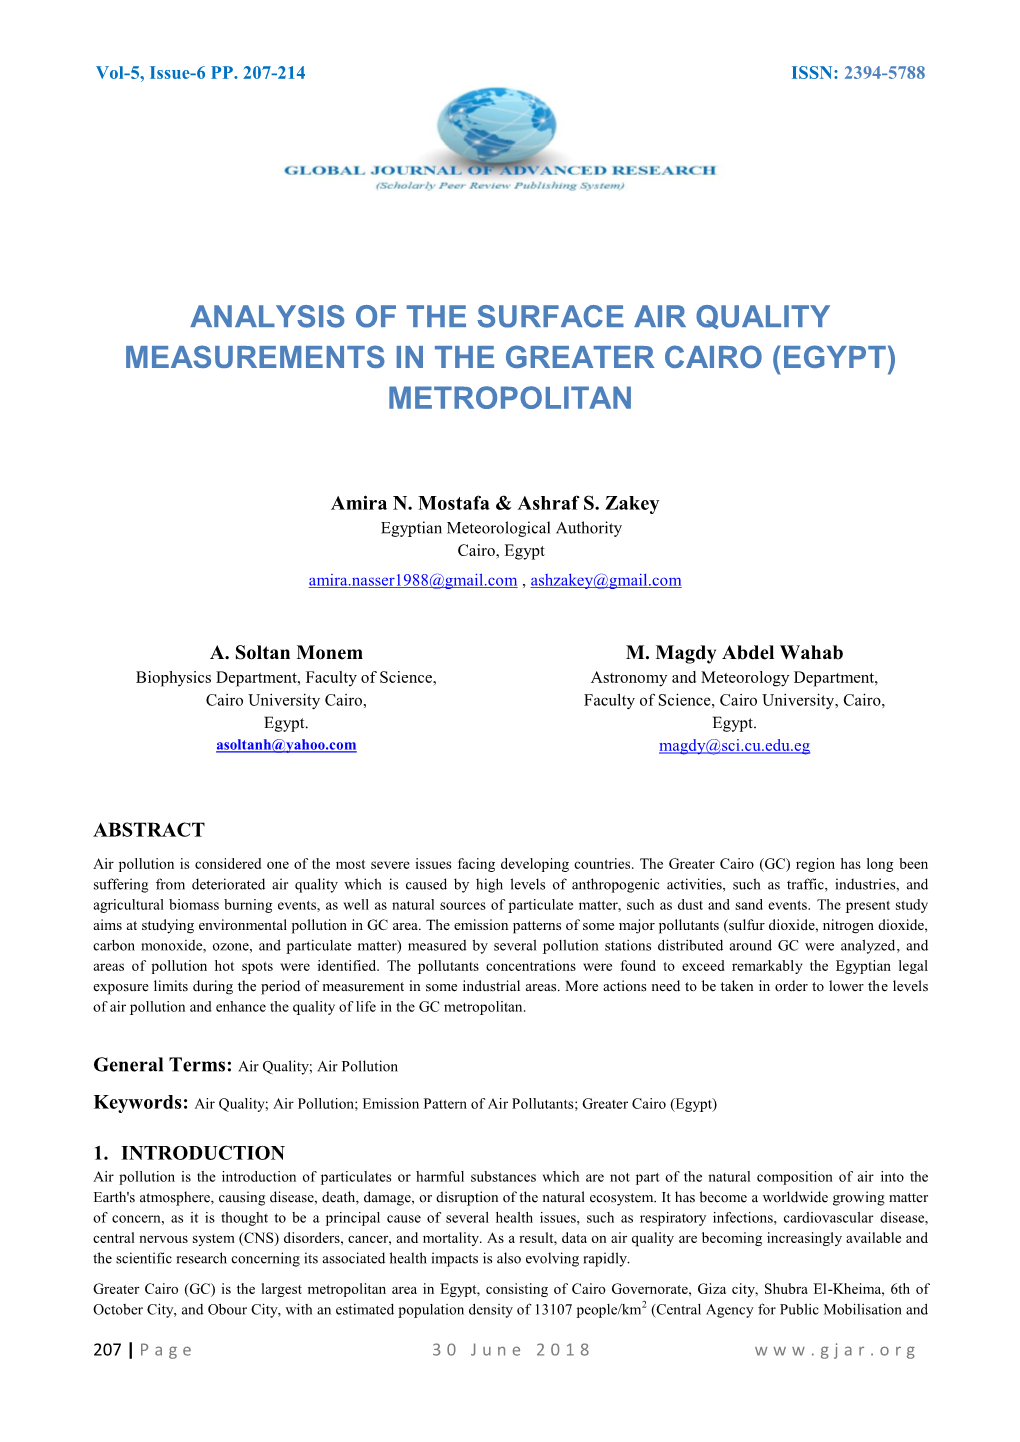 Analysis of the Surface Air Quality Measurements in the Greater Cairo (Egypt) Metropolitan